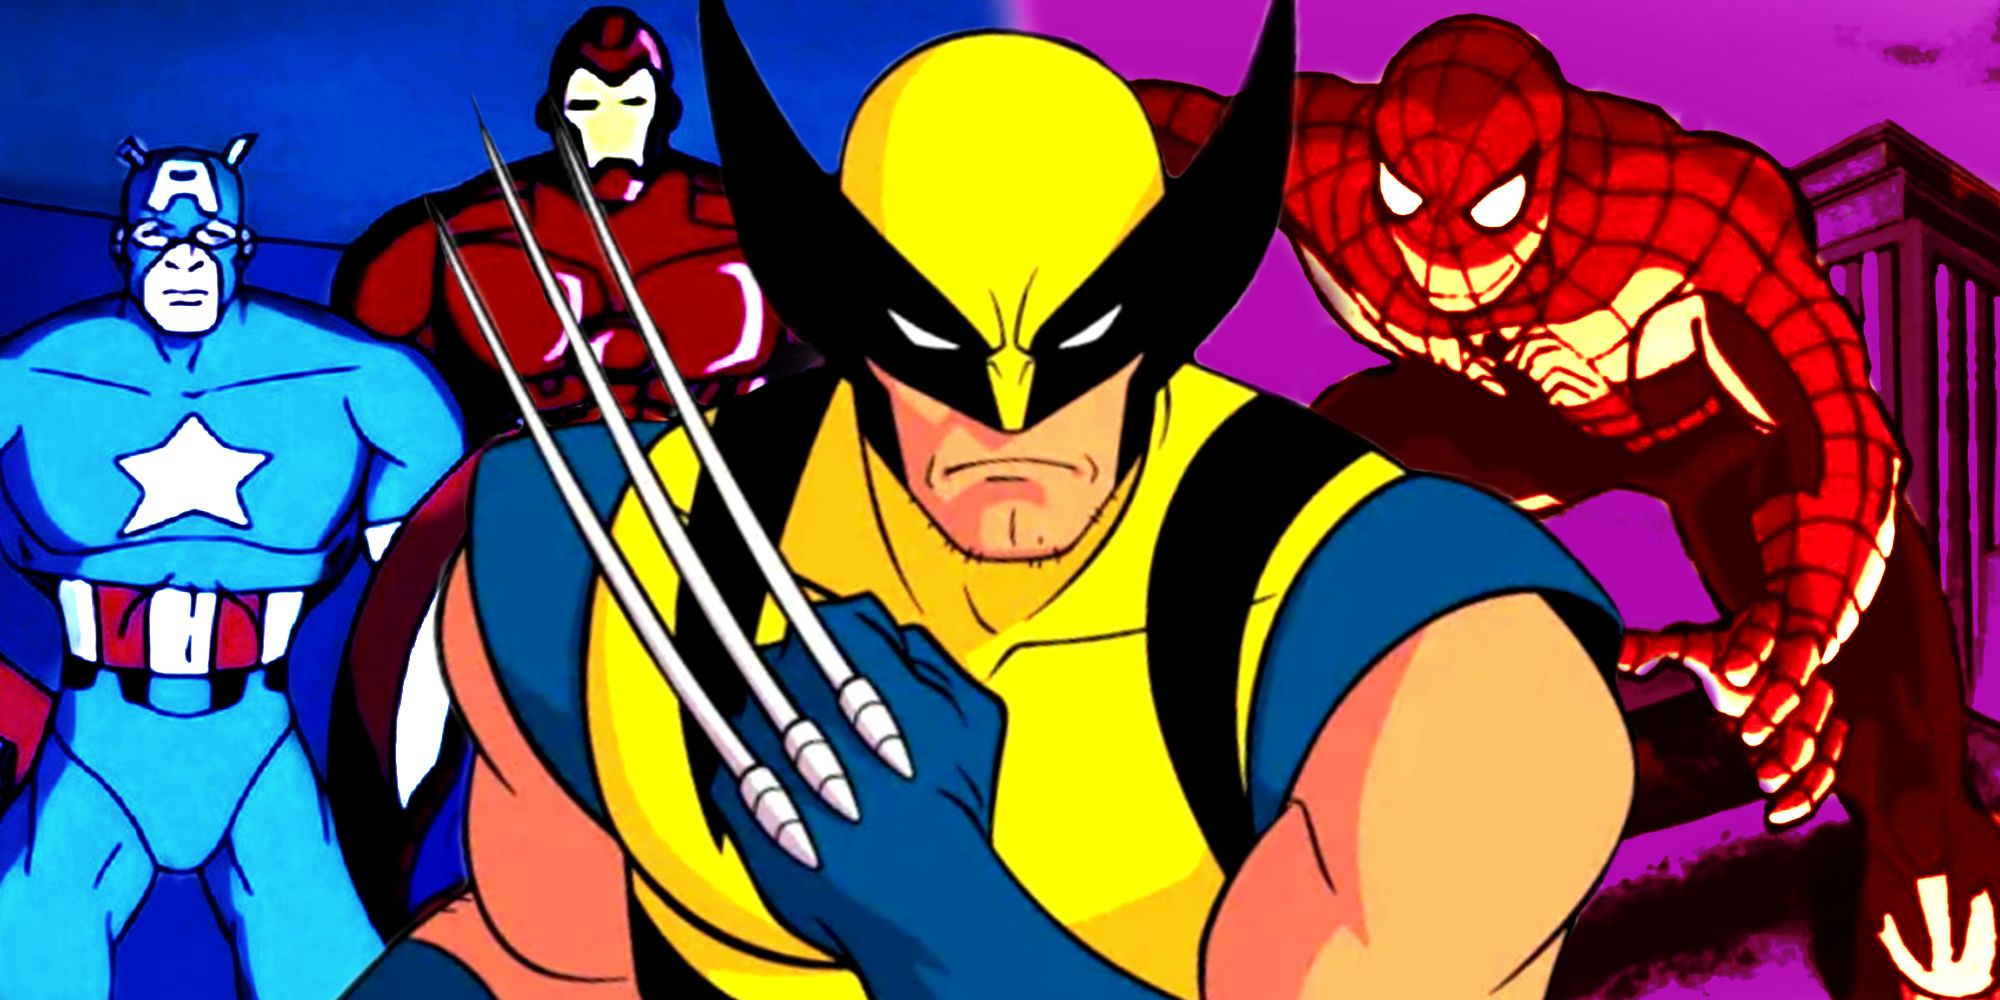 Wolverine uses his Claws in X-Men '97 and Spider-Man Appears with the Avengers in the 1990s Animated Series